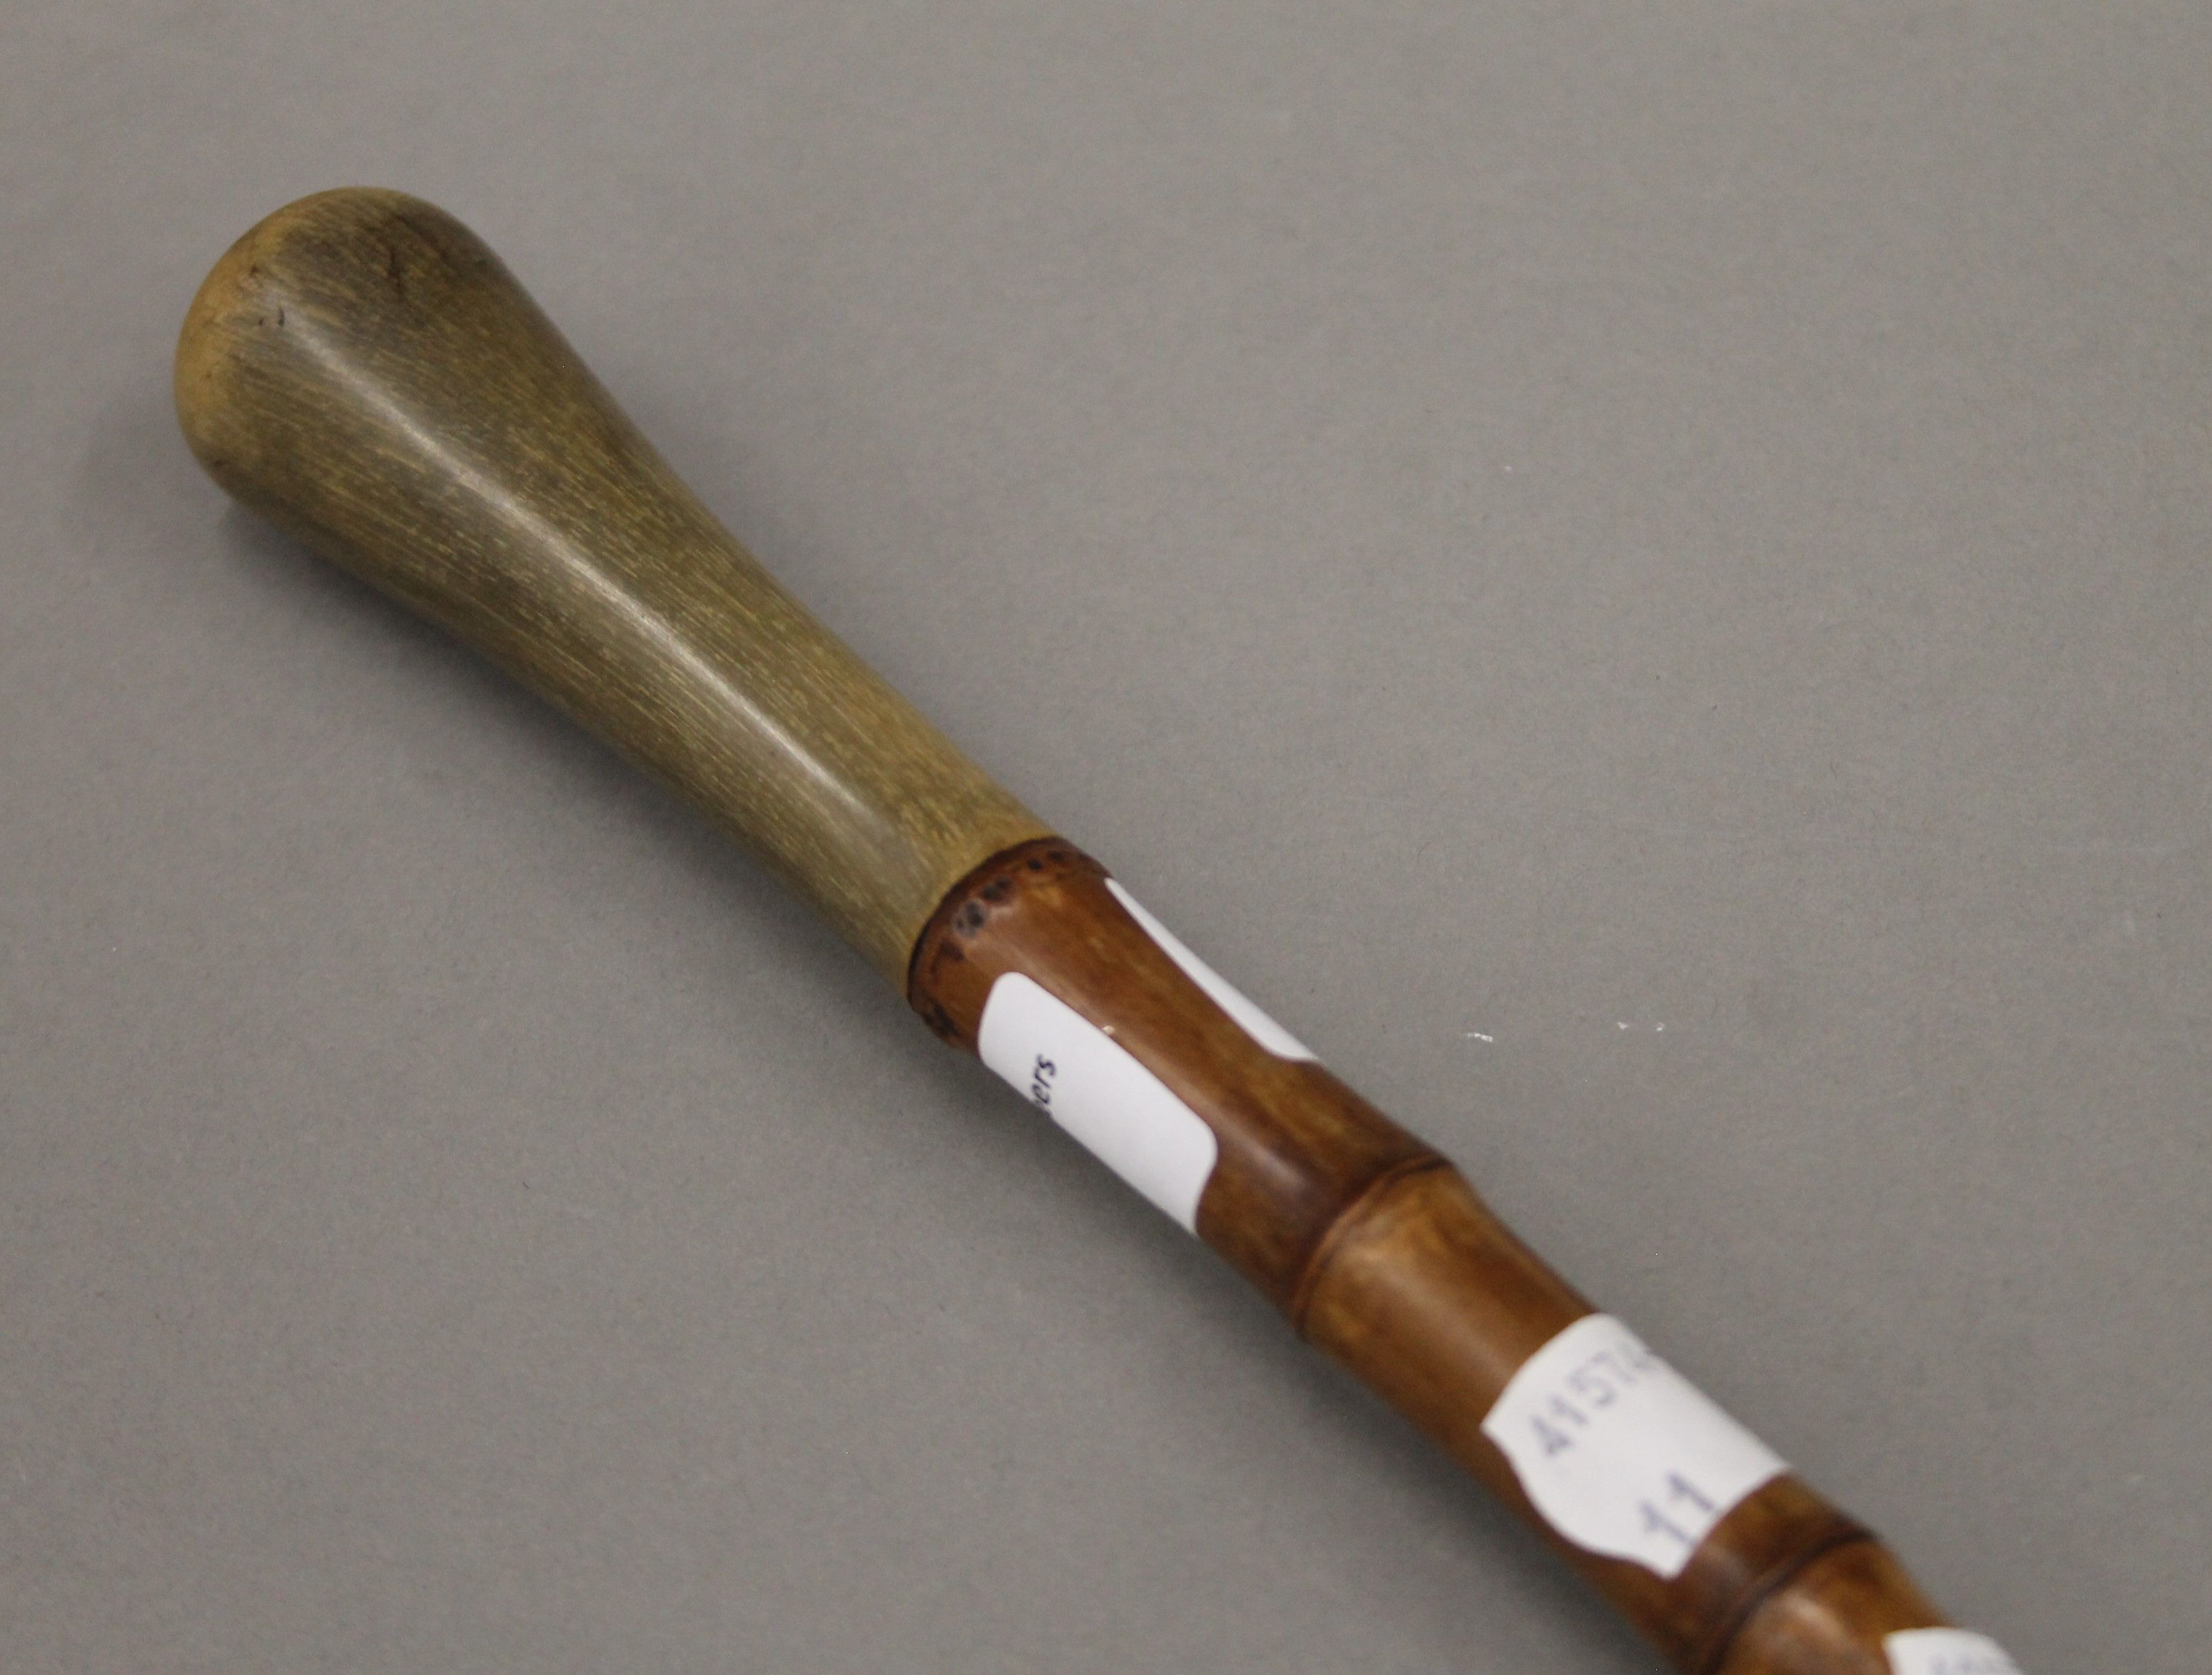 A 19th century bamboo walking cane, the handle possibly rhino horn. 79 cm long. - Image 3 of 3